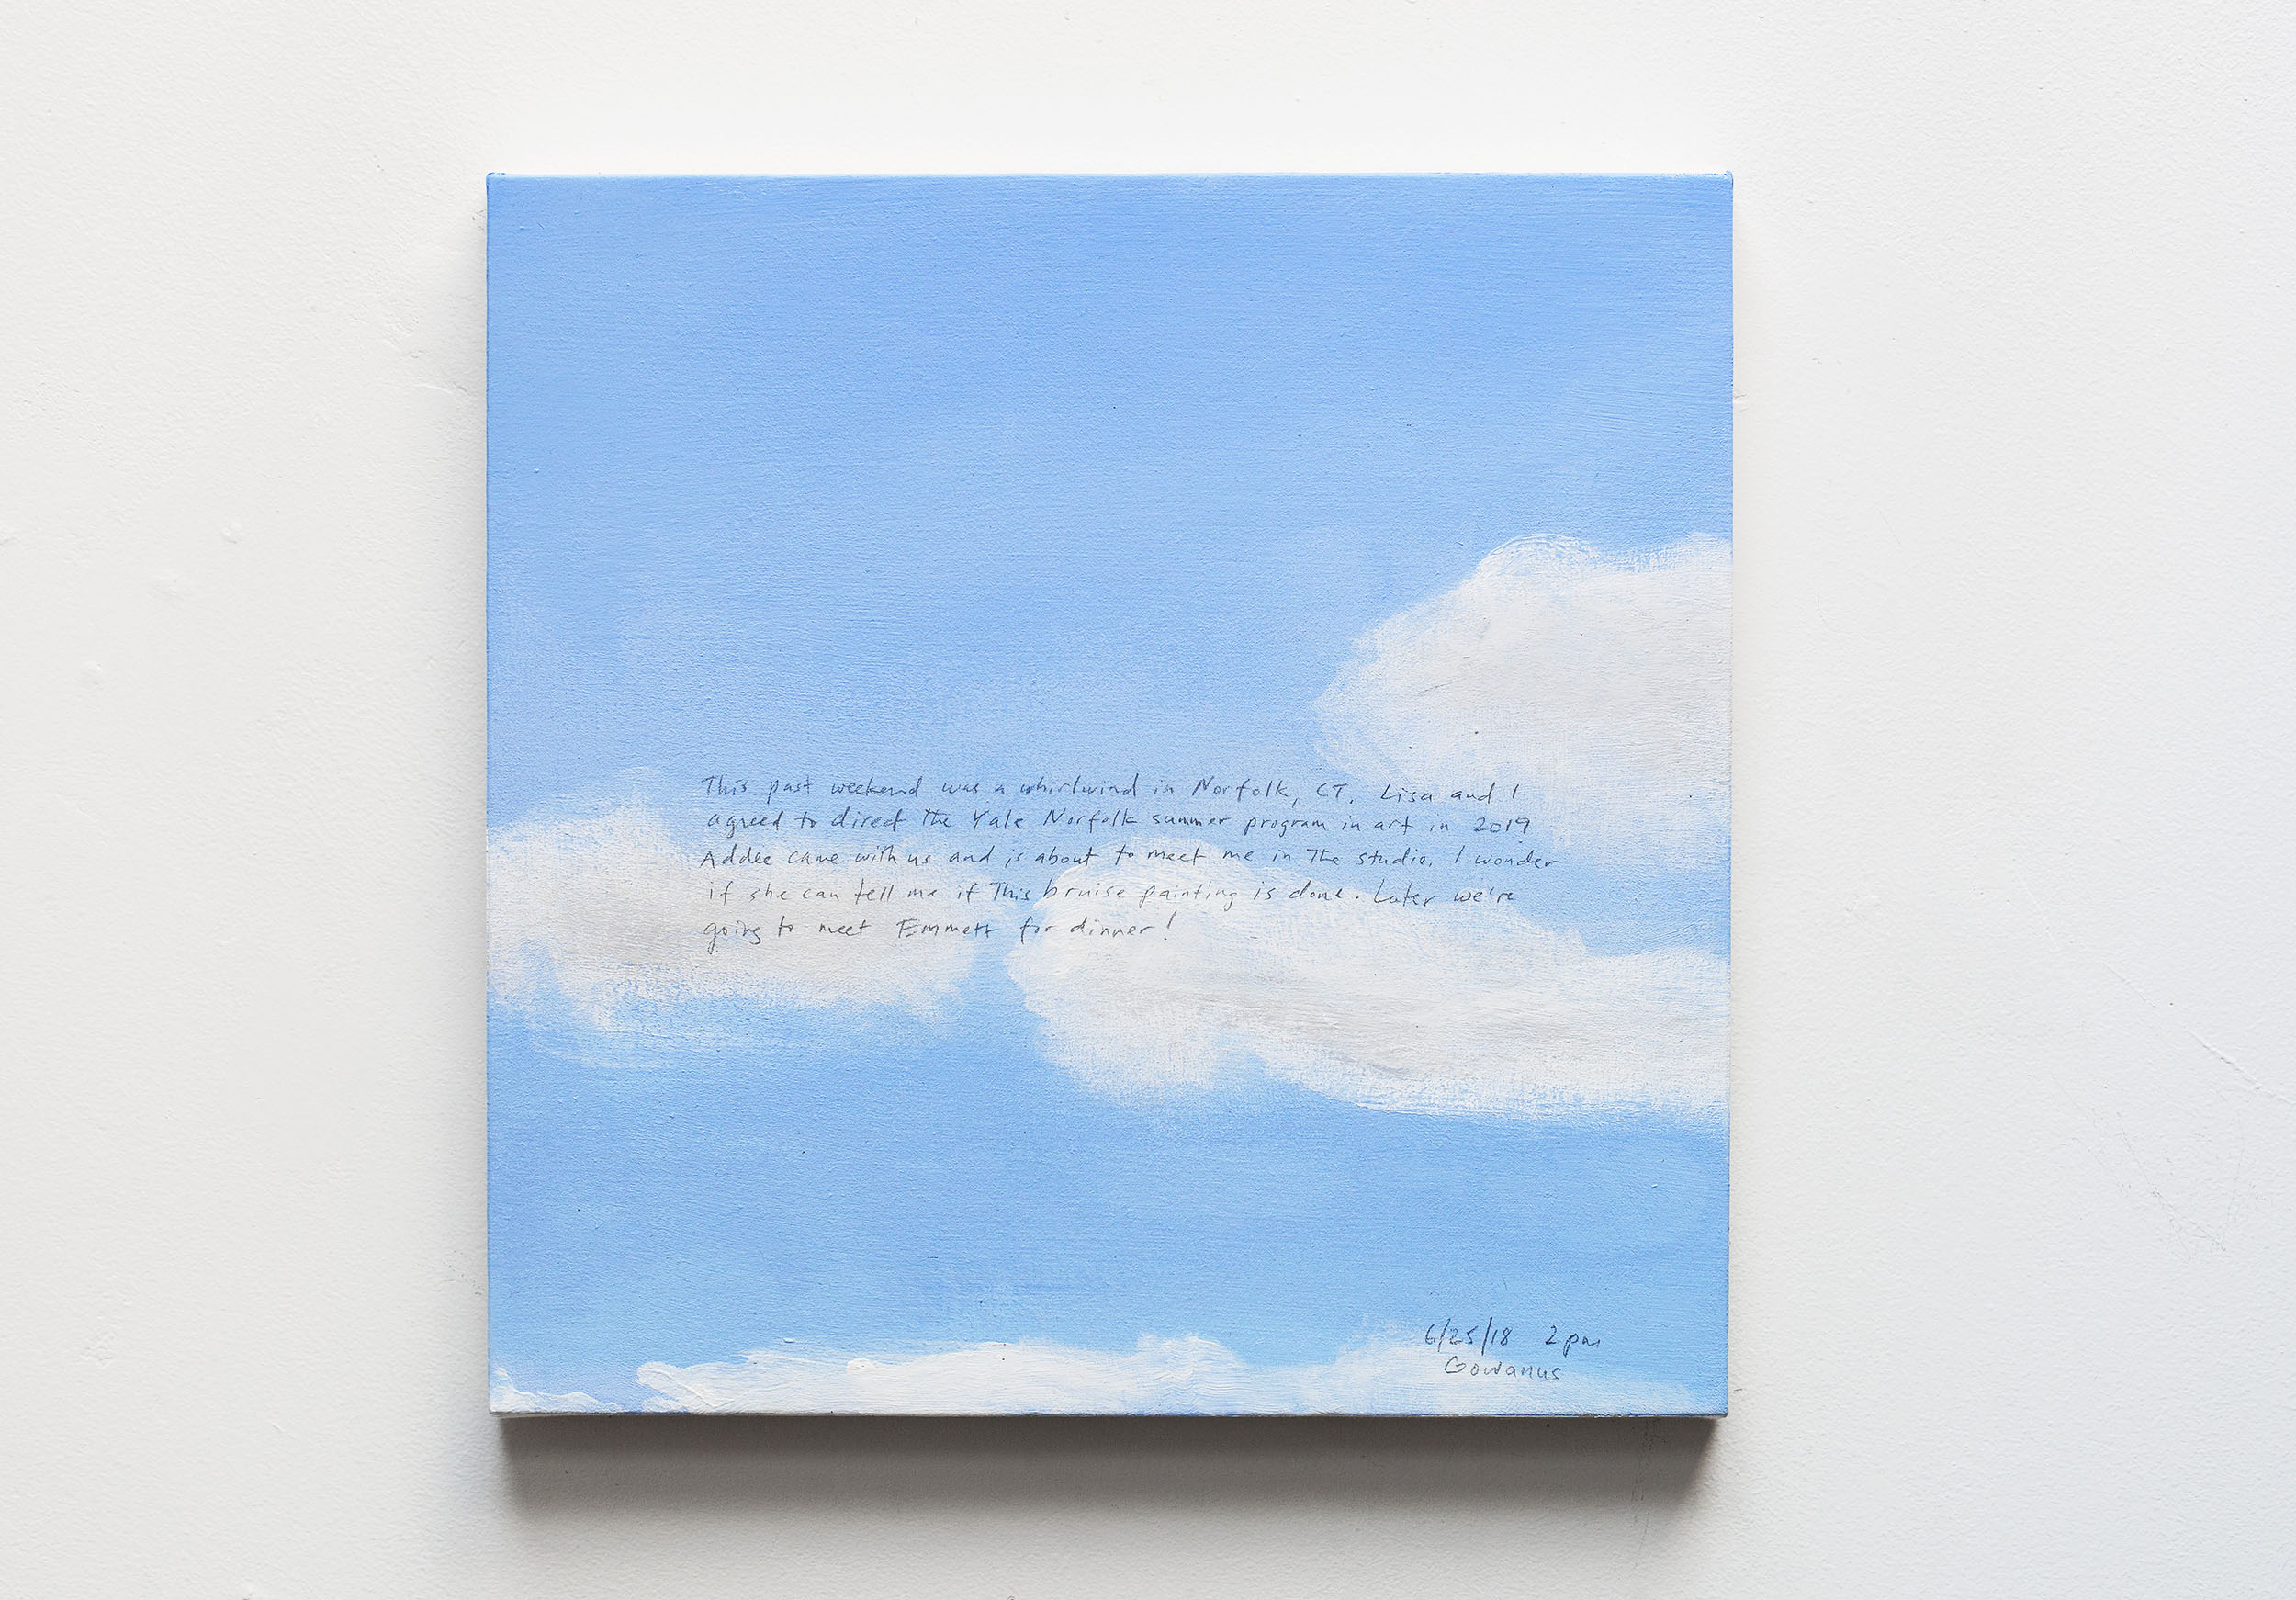 A 14 × 14 inch, acrylic painting of the sky. A journal entry is handwritten on the painting:

“This past weekend was a whirlwind in Norfolk, CT. Lisa and I agreed to direct Yale Norfolk summer program in art in 2019. Addee came with us and is about to meet me in the studio. I wonder if she can tell me if this bruise painting is done. Later we’re going to meet Emmett for dinner!

6/25/18 2pm
Gowanus”